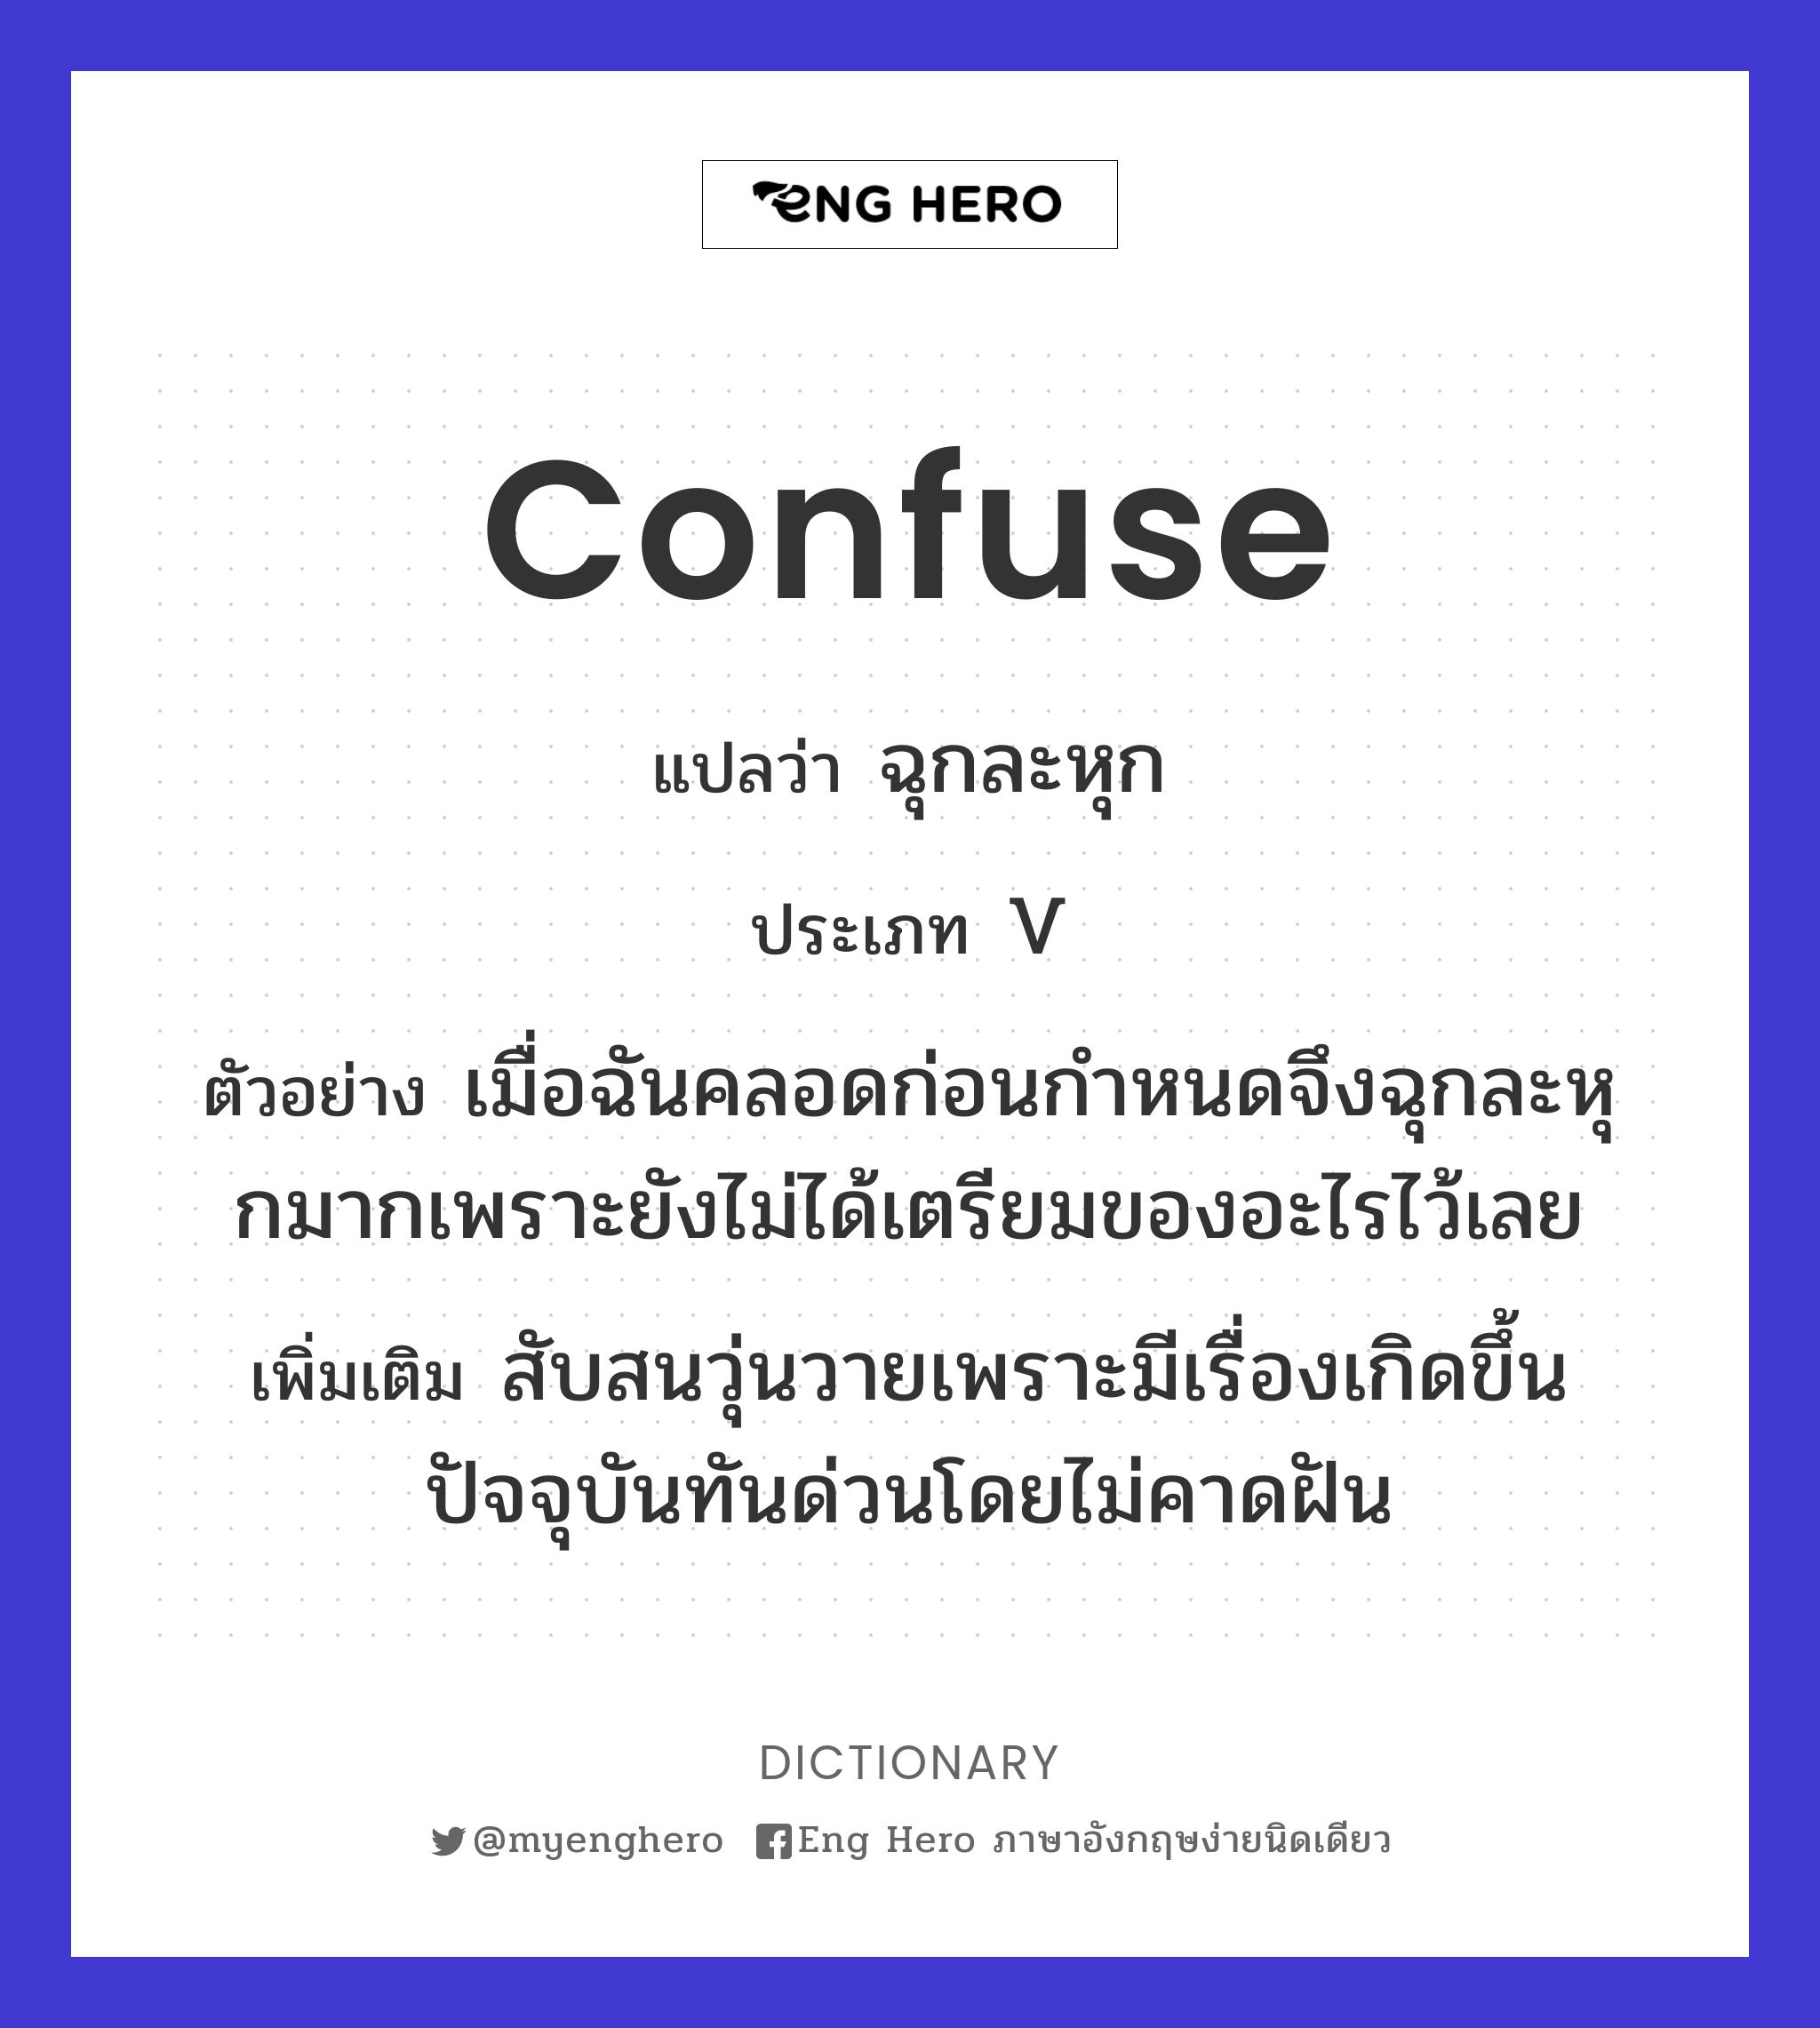 confuse